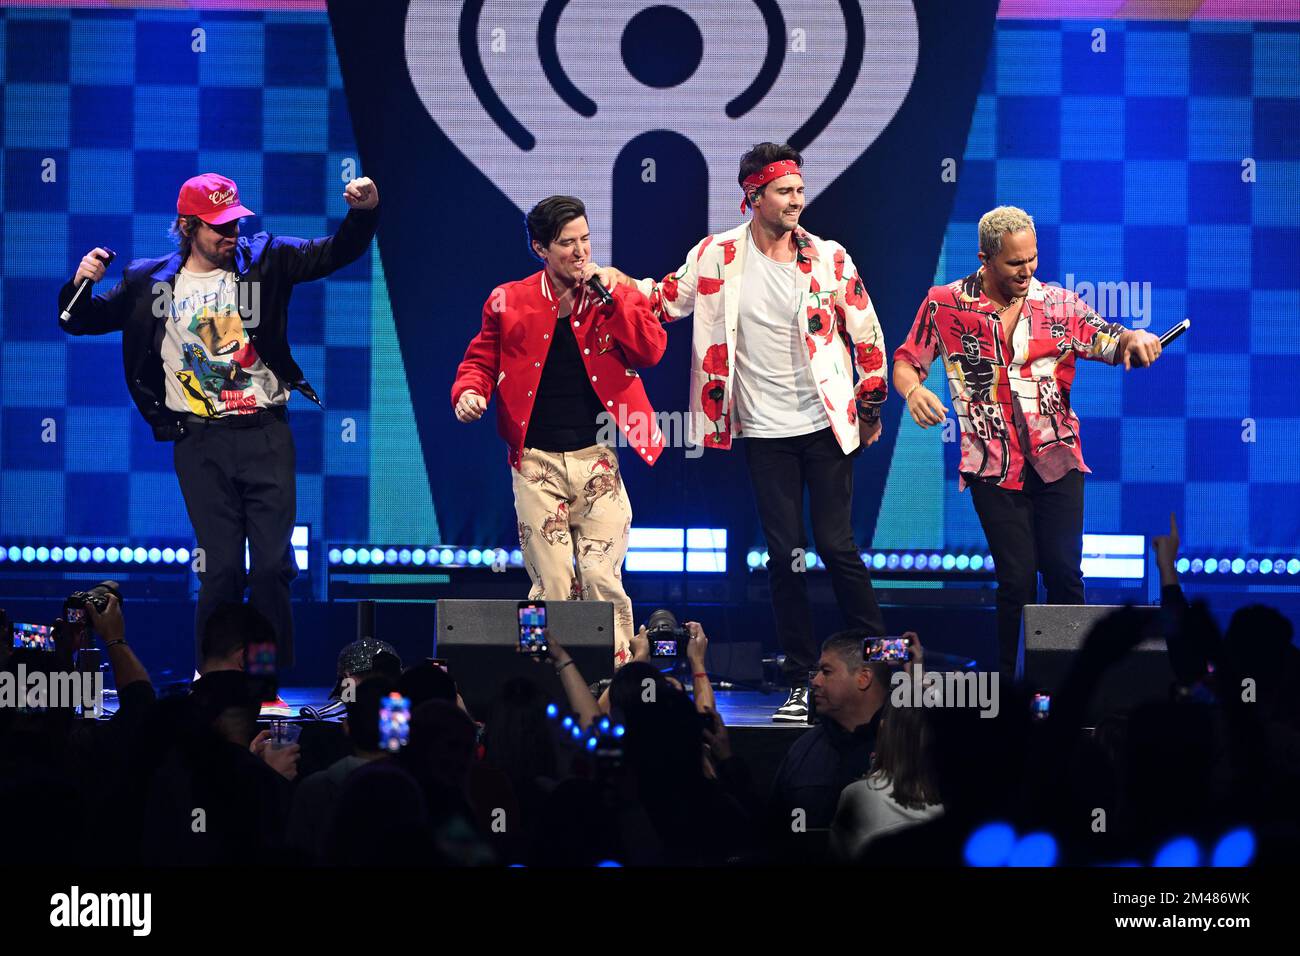 Sunrise FL, USA. 18th Dec, 2022. Kendall Schmidt, Logan Henderson, James Maslow and Carlos Pena Vega of Big Time Rush perform during the iHeartRadio Y100 Jingle Ball 2022 at The FLA Live Arena on December 18, 2022 in Sunrise, Florida. Credit: Mpi04/Media Punch/Alamy Live News Stock Photo